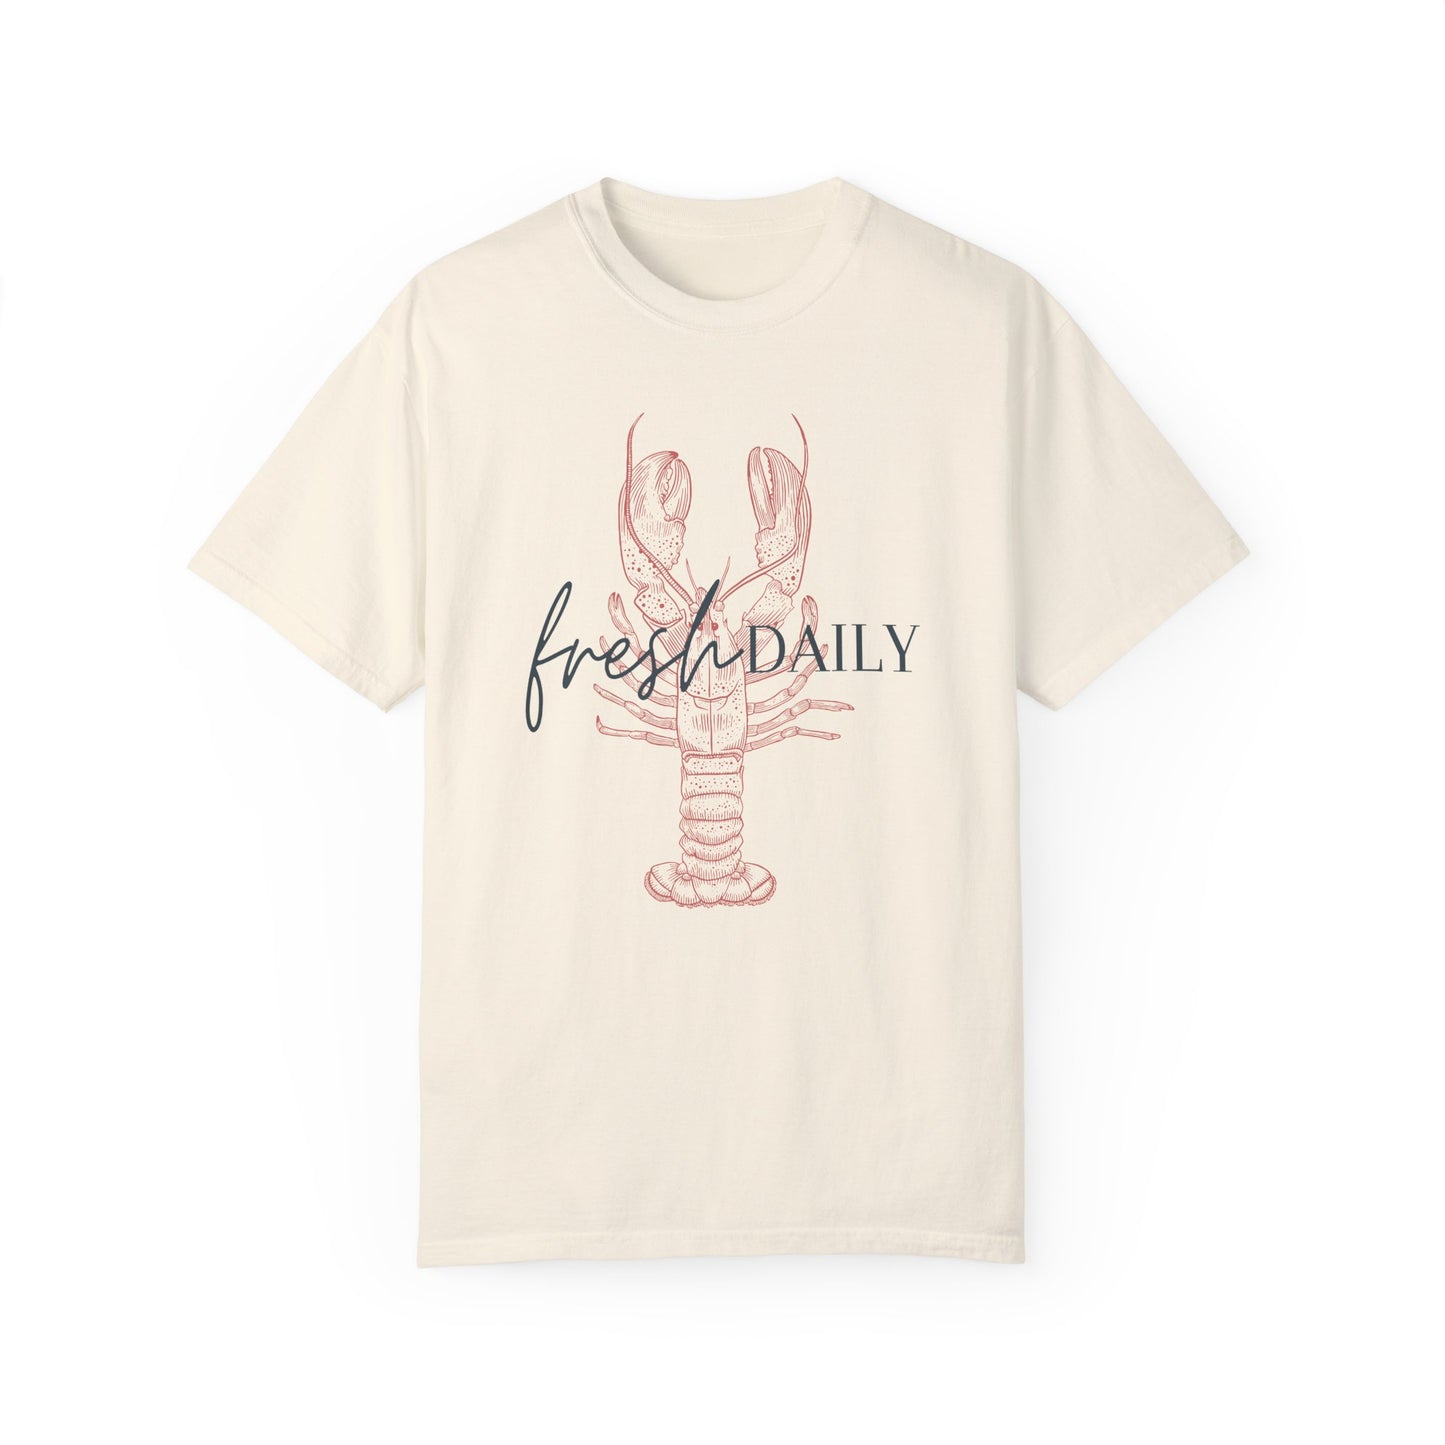 Summer Tee Collection - Lobster